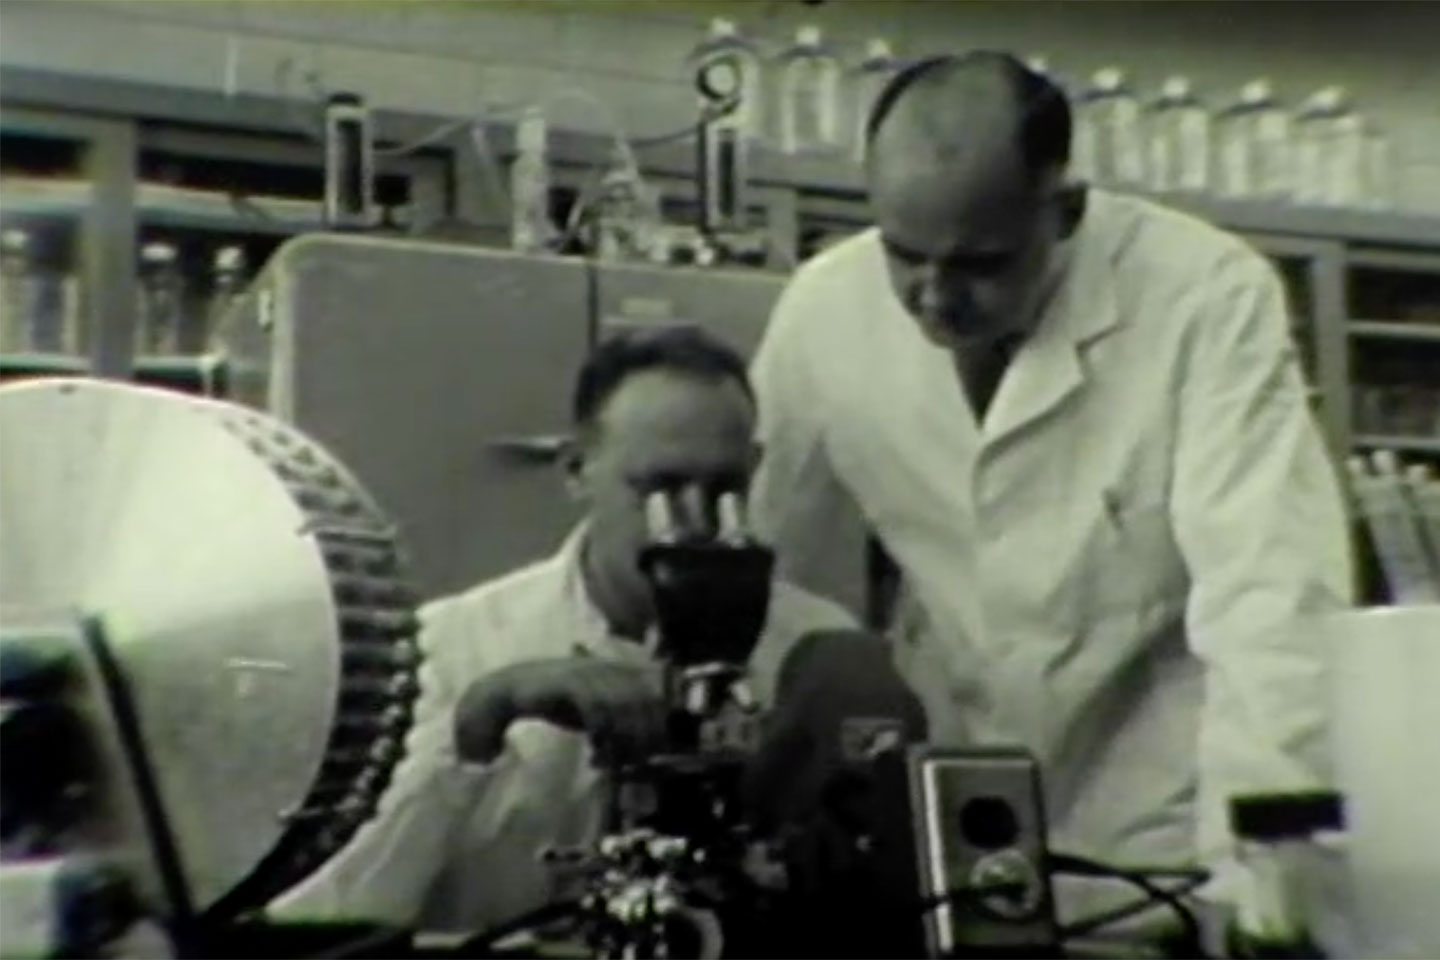 Dr Hilleman (standing) at Merck with a colleague.